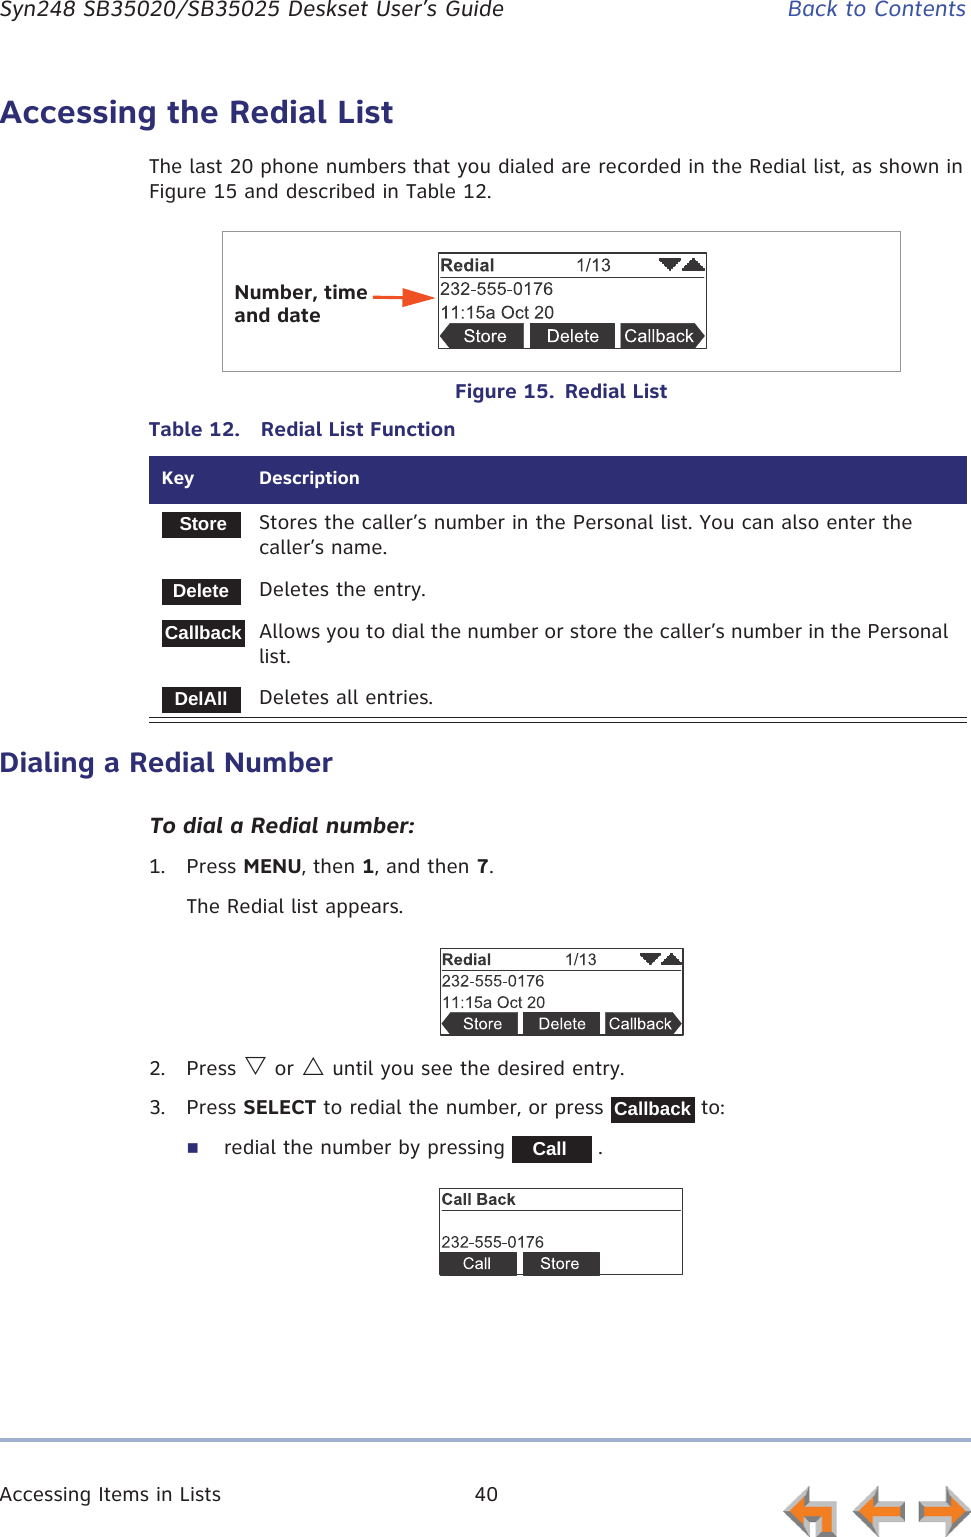 Accessing Items in Lists 40      Syn248 SB35020/SB35025 Deskset User’s Guide Back to ContentsAccessing the Redial ListThe last 20 phone numbers that you dialed are recorded in the Redial list, as shown in Figure 15 and described in Table 12.Figure 15.  Redial ListDialing a Redial NumberTo dial a Redial number:1. Press MENU, then 1, and then 7.The Redial list appears.2. Press V or U until you see the desired entry.3. Press SELECT to redial the number, or press   to:redial the number by pressing   .Table 12.  Redial List FunctionKey  DescriptionStores the caller’s number in the Personal list. You can also enter the caller’s name.Deletes the entry.Allows you to dial the number or store the caller’s number in the Personal list.Deletes all entries.Number, time and dateStoreDeleteCallbackDelAllCallbackCall